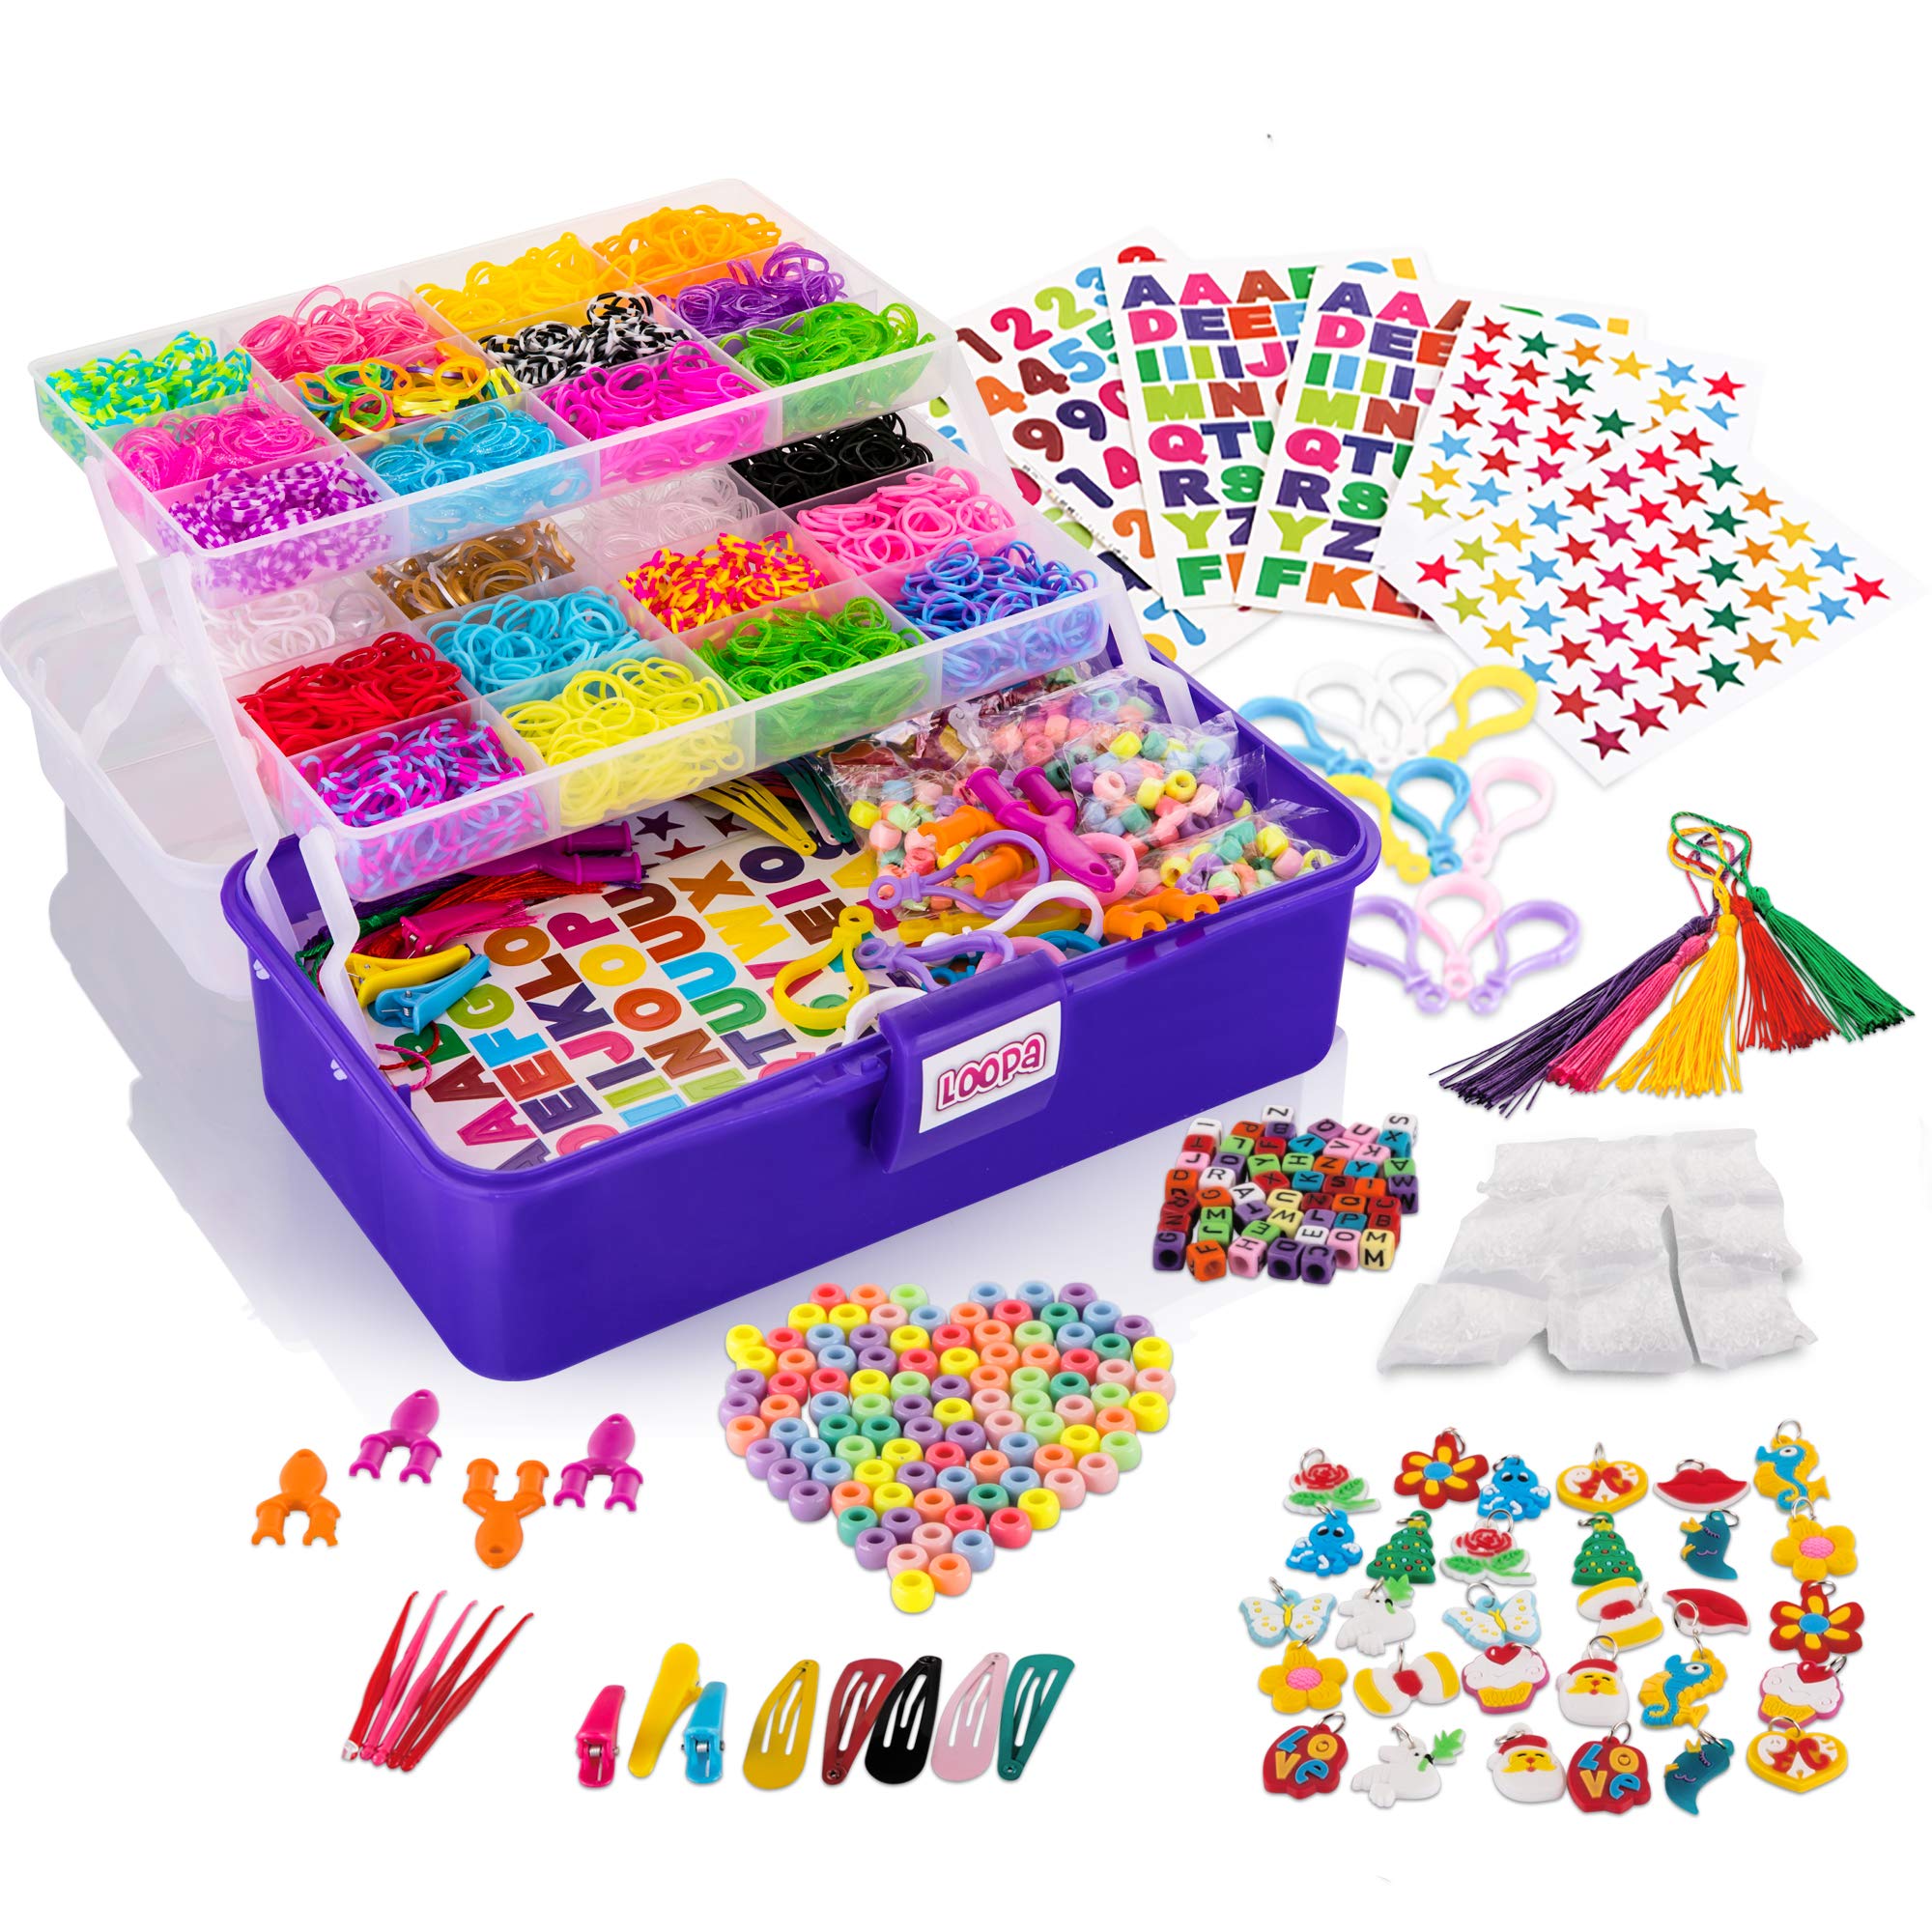 Loopa Rubber Bands Kit , 10,000+ Colorful Bands Refill Set for Kids, DIY  Loom Bracelets Making Set with Beads & Endless Accessories - Box Case  Included